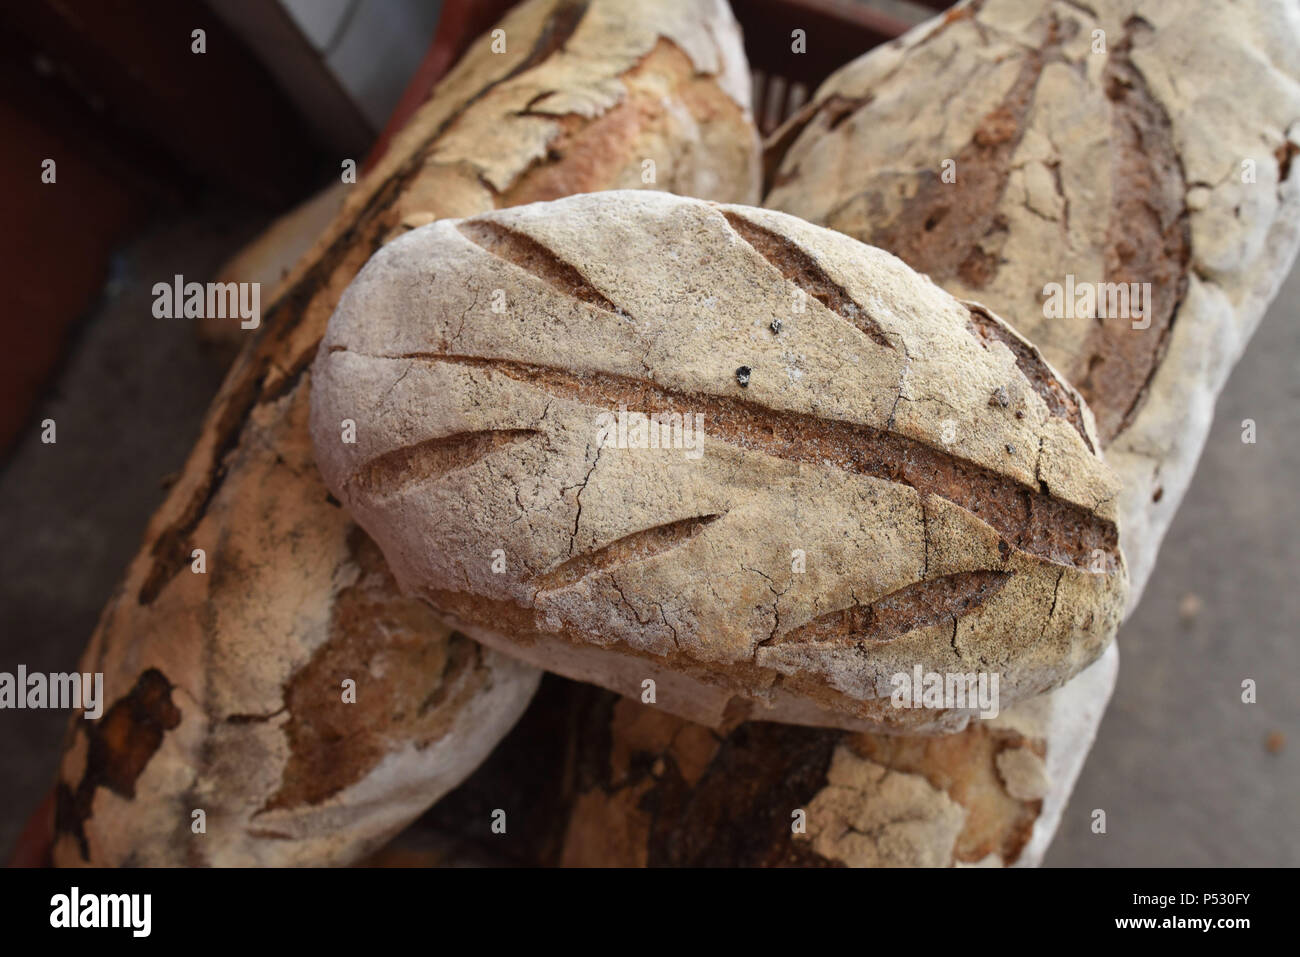 June 30, 2015 - Ungersheim, France: Bread made by Jean-Christophe and Lili Moyses, who describe themselves as 'baker-peasants'. The couple grow old varieties of wheat, including some a 1.80 meter-high variety, to produce flour and breads which are then locally sold. Ungersheim (population: 2000) is known as the greenest village in France because of its various environment-friendly initiatives: construction of a solar power plant, use of municipal agricultural land to promote local bio food, horse transport for school children, pesticide-free green spaces, eco-lodging, wood heating, etc. Ungers Stock Photo